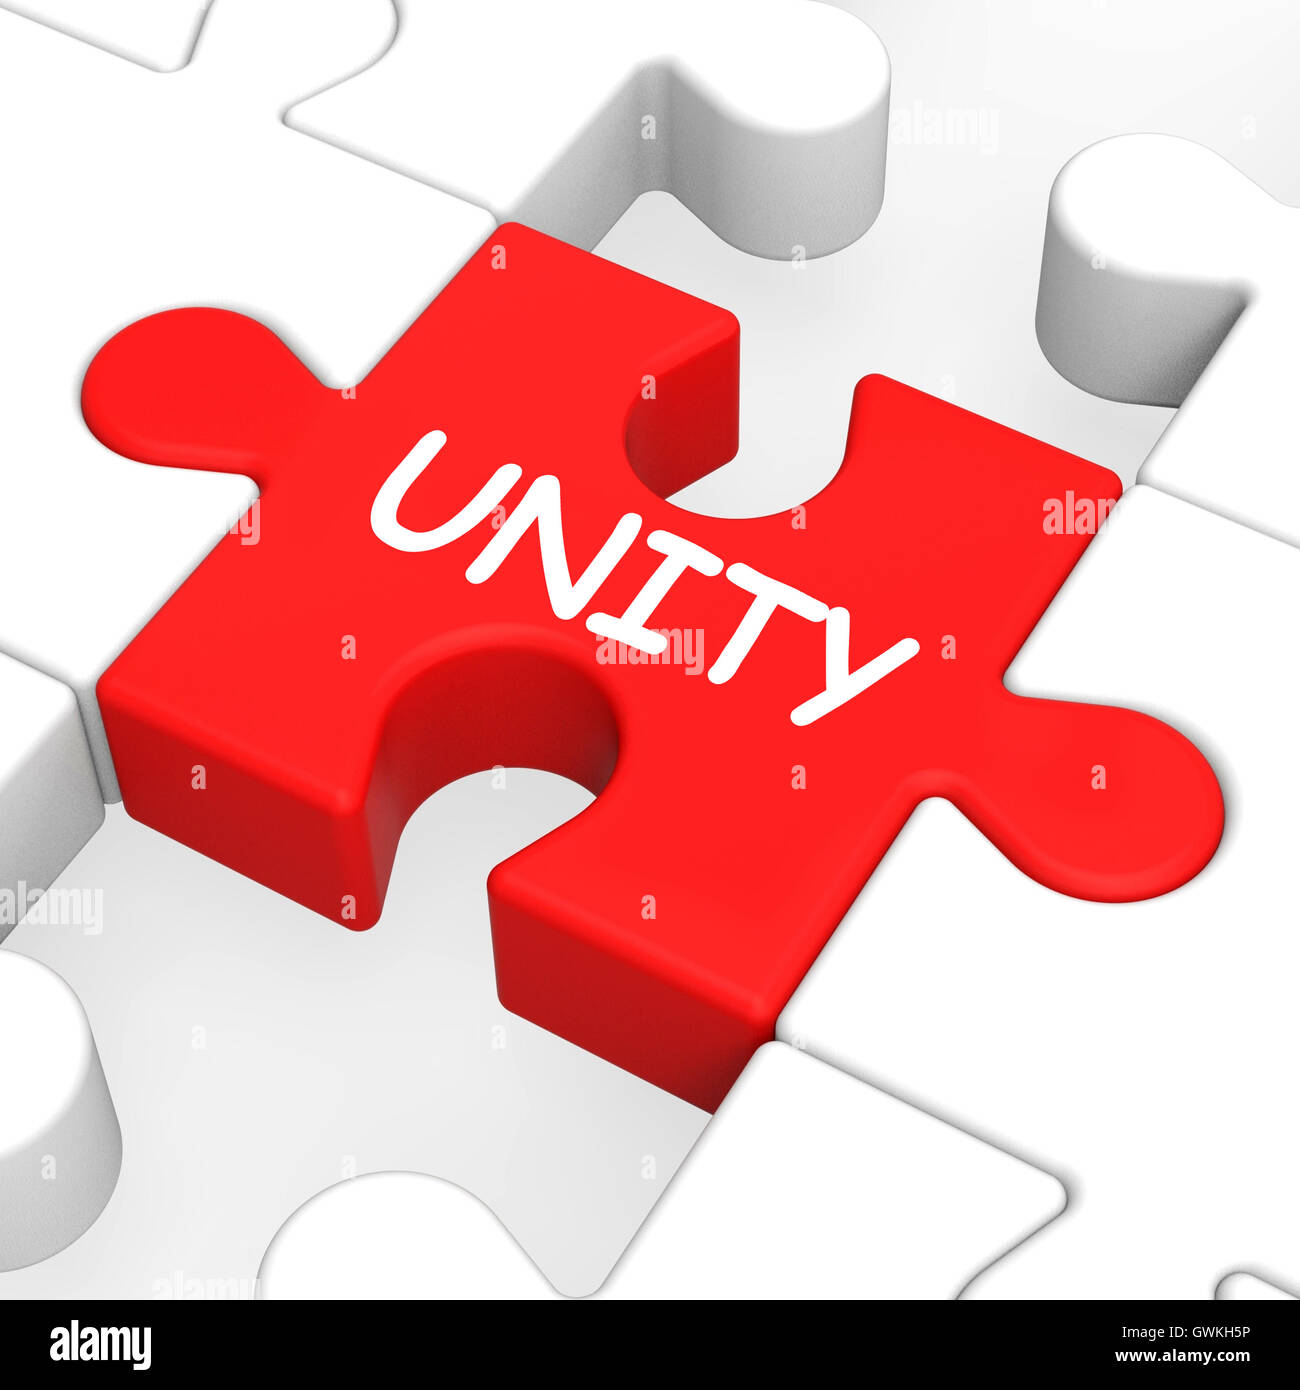 Unity Puzzle Shows Team Teamwork Or Collaboration Stock Photo